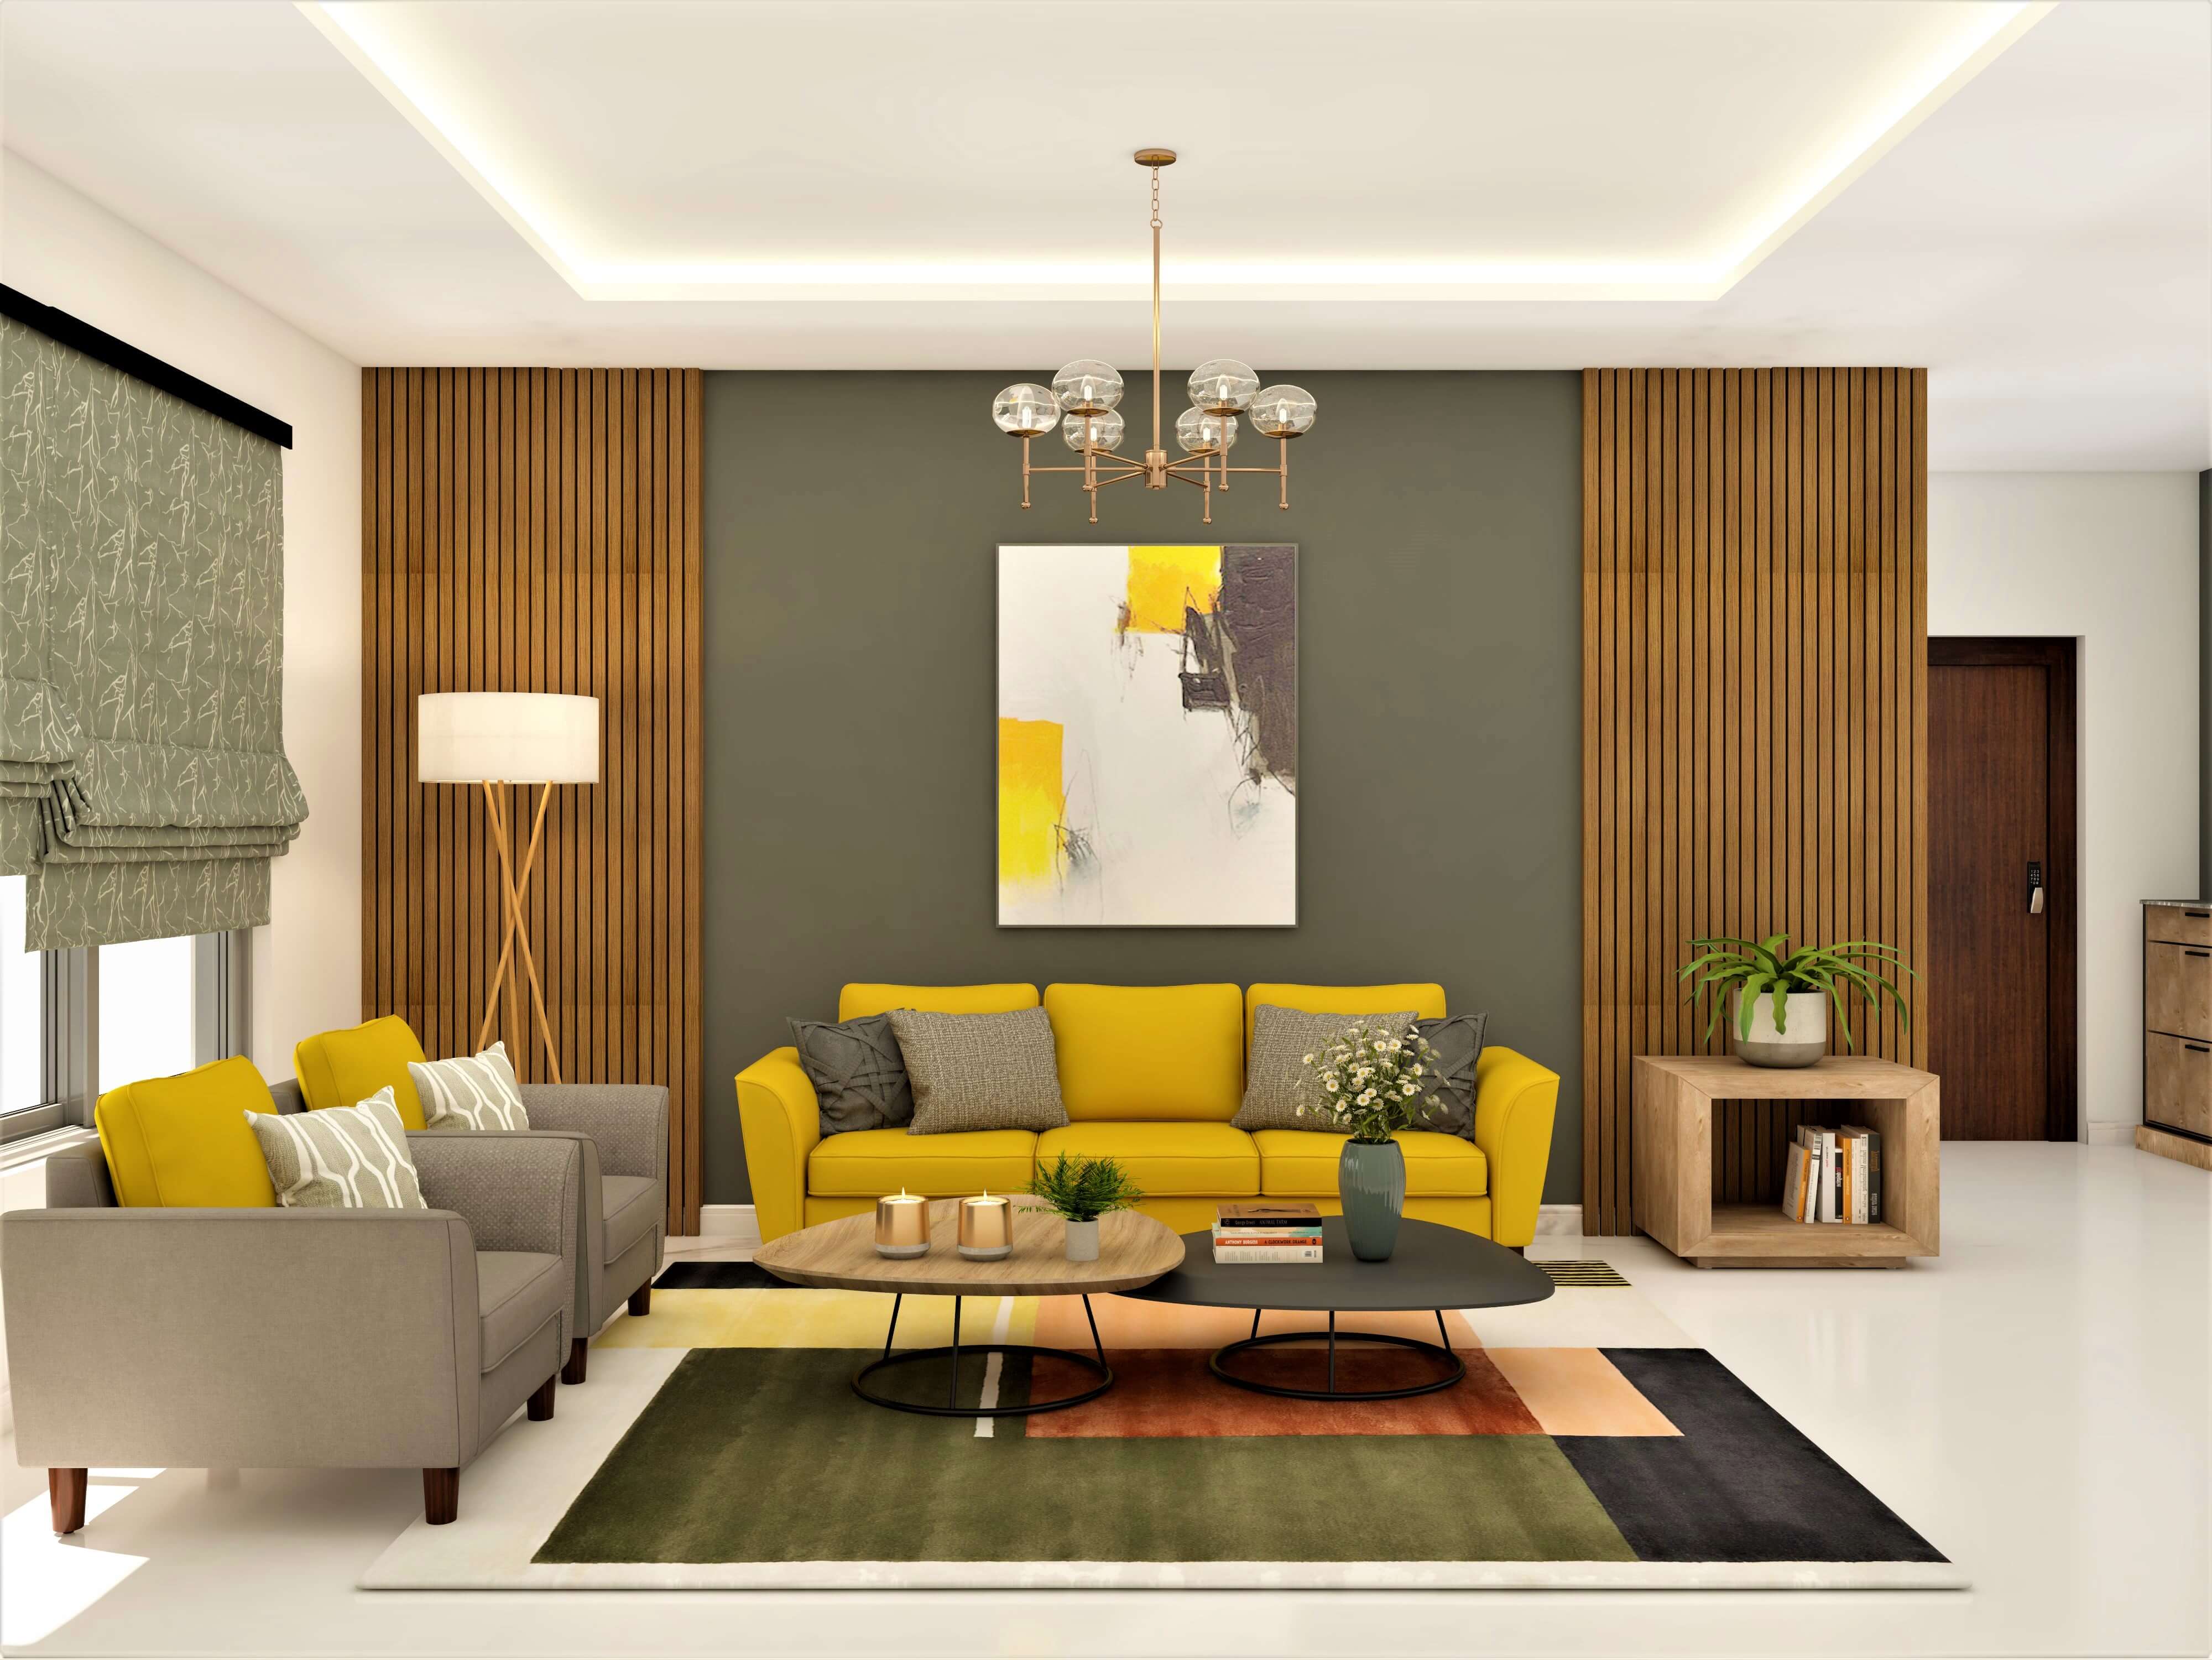 Modern living room design with wooden fluted panels - Beautiful Homes